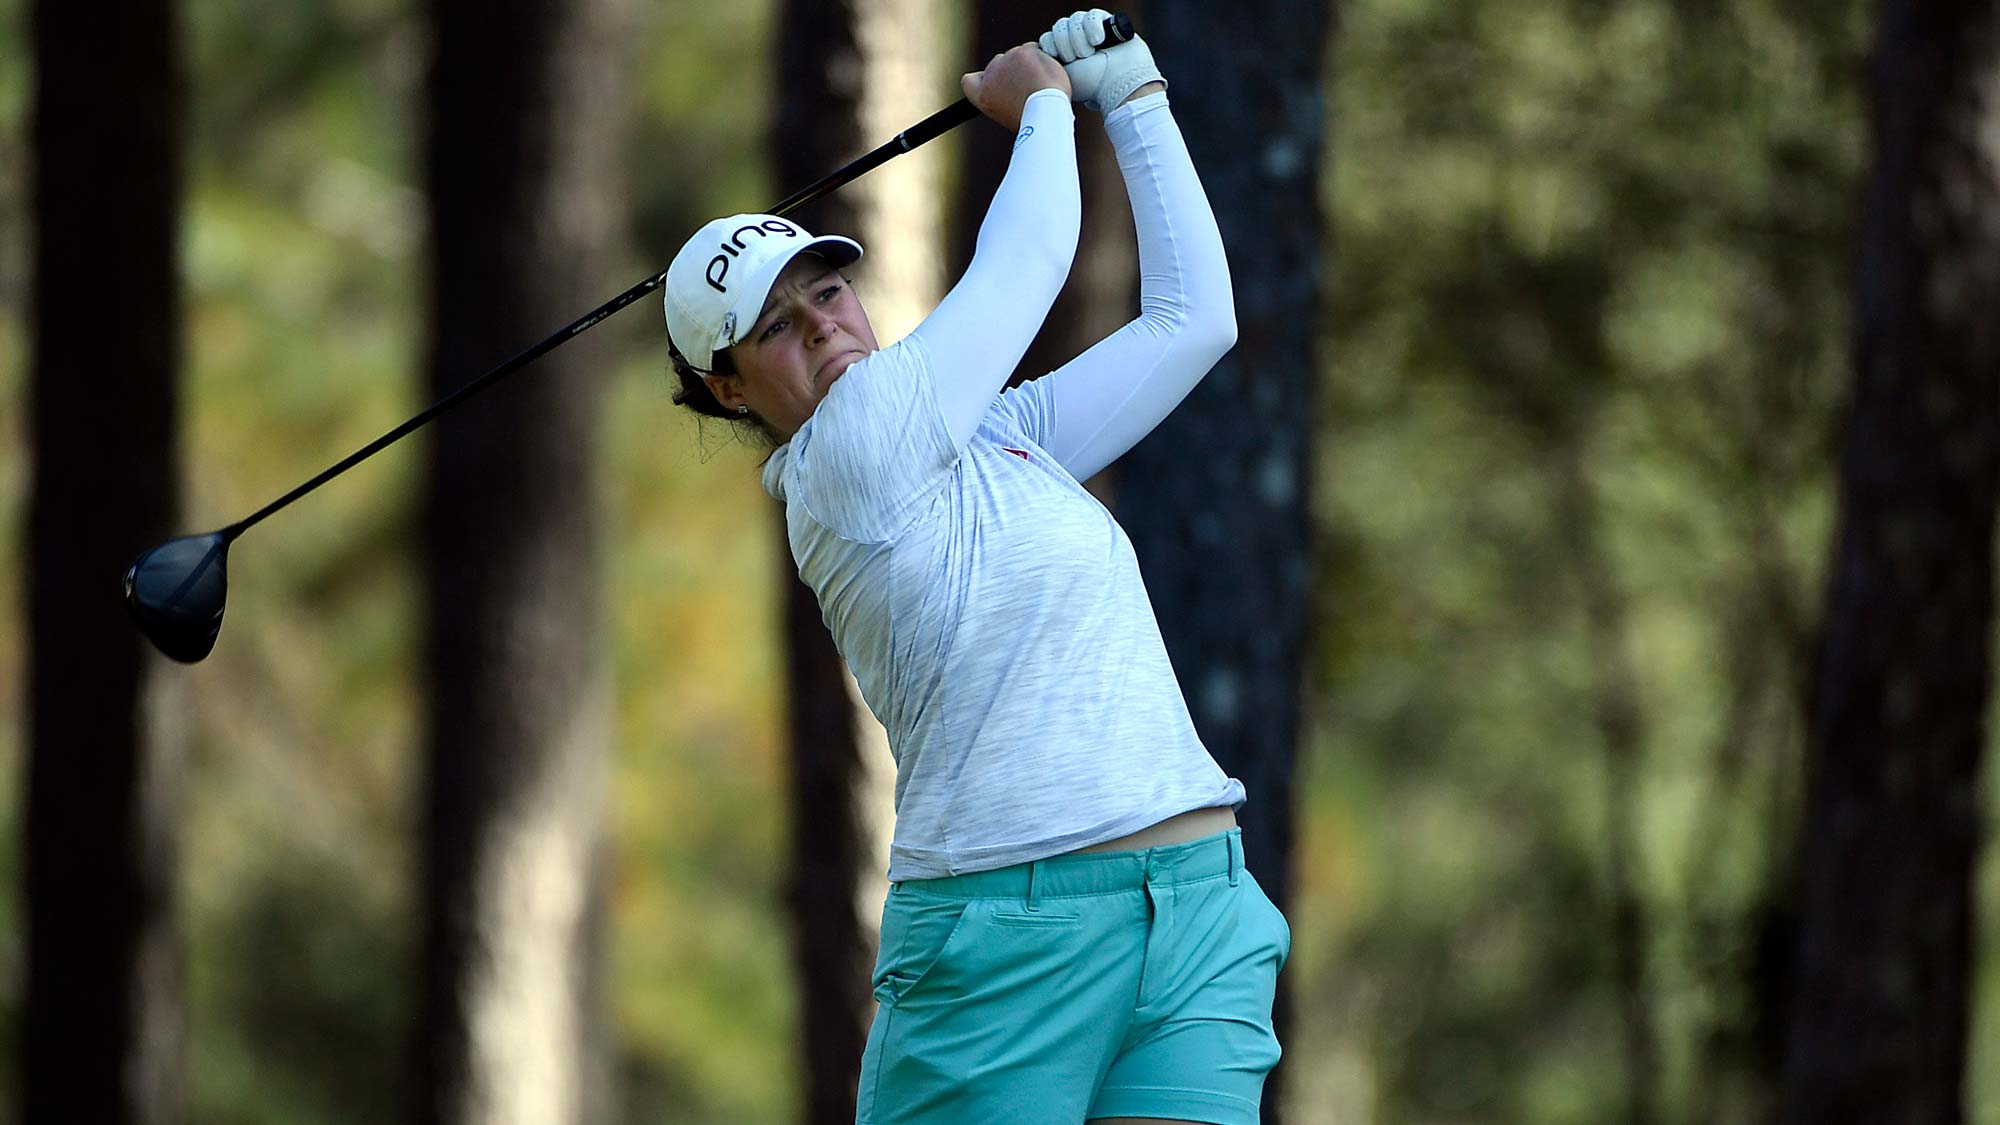 Ally McDonald tees off on the third hole during round two of the 2020 LPGA Drive On Championship - Reynolds Lake Oconee